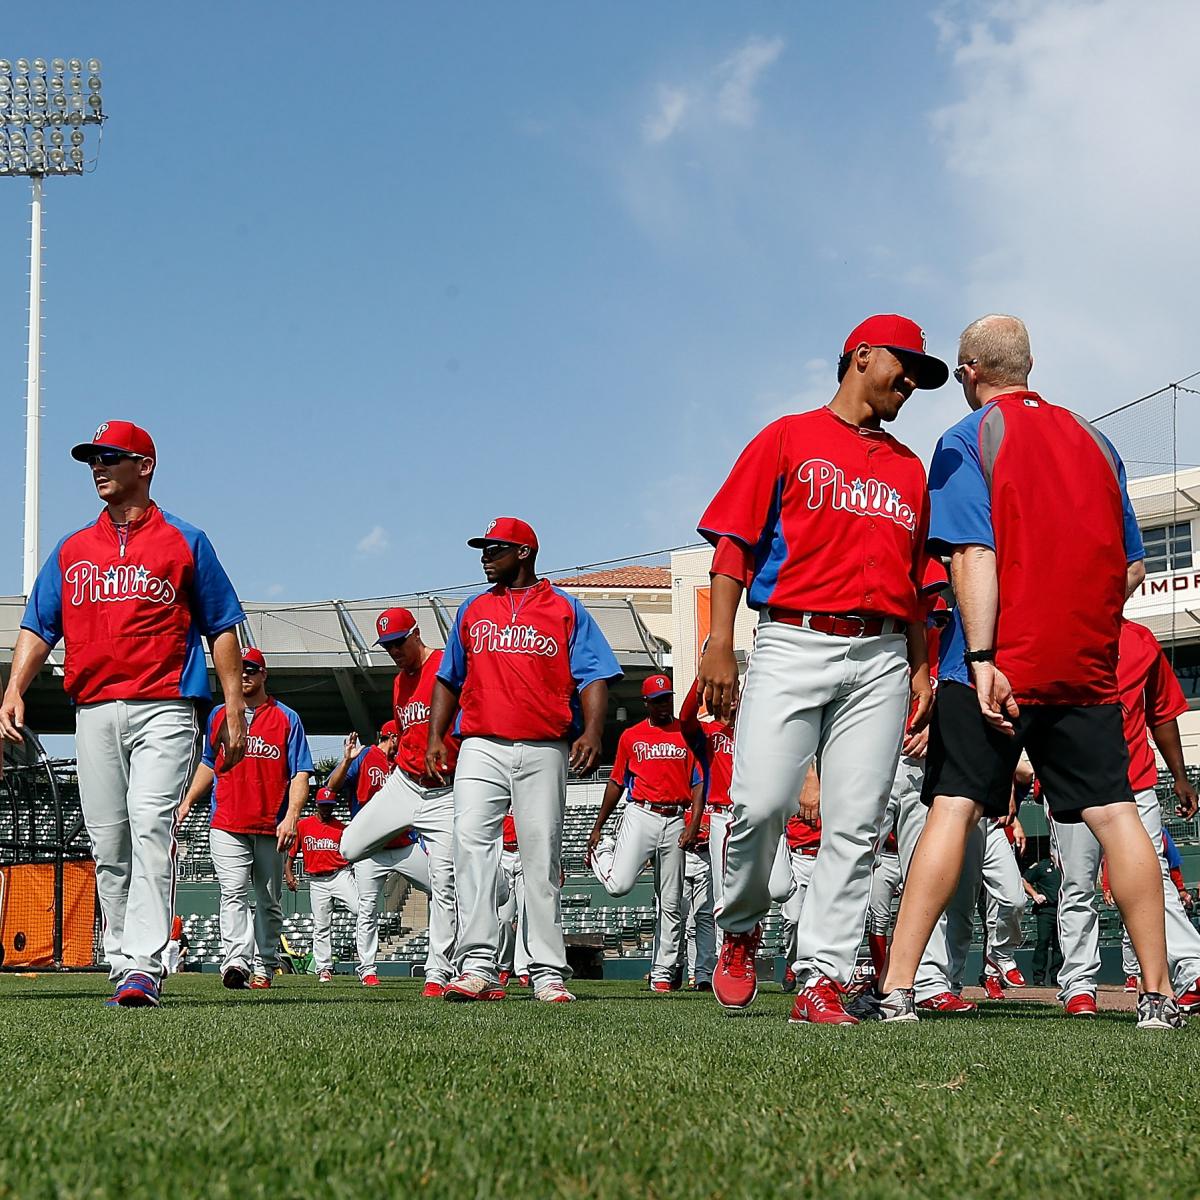 Phillies players impressing in Spring Training